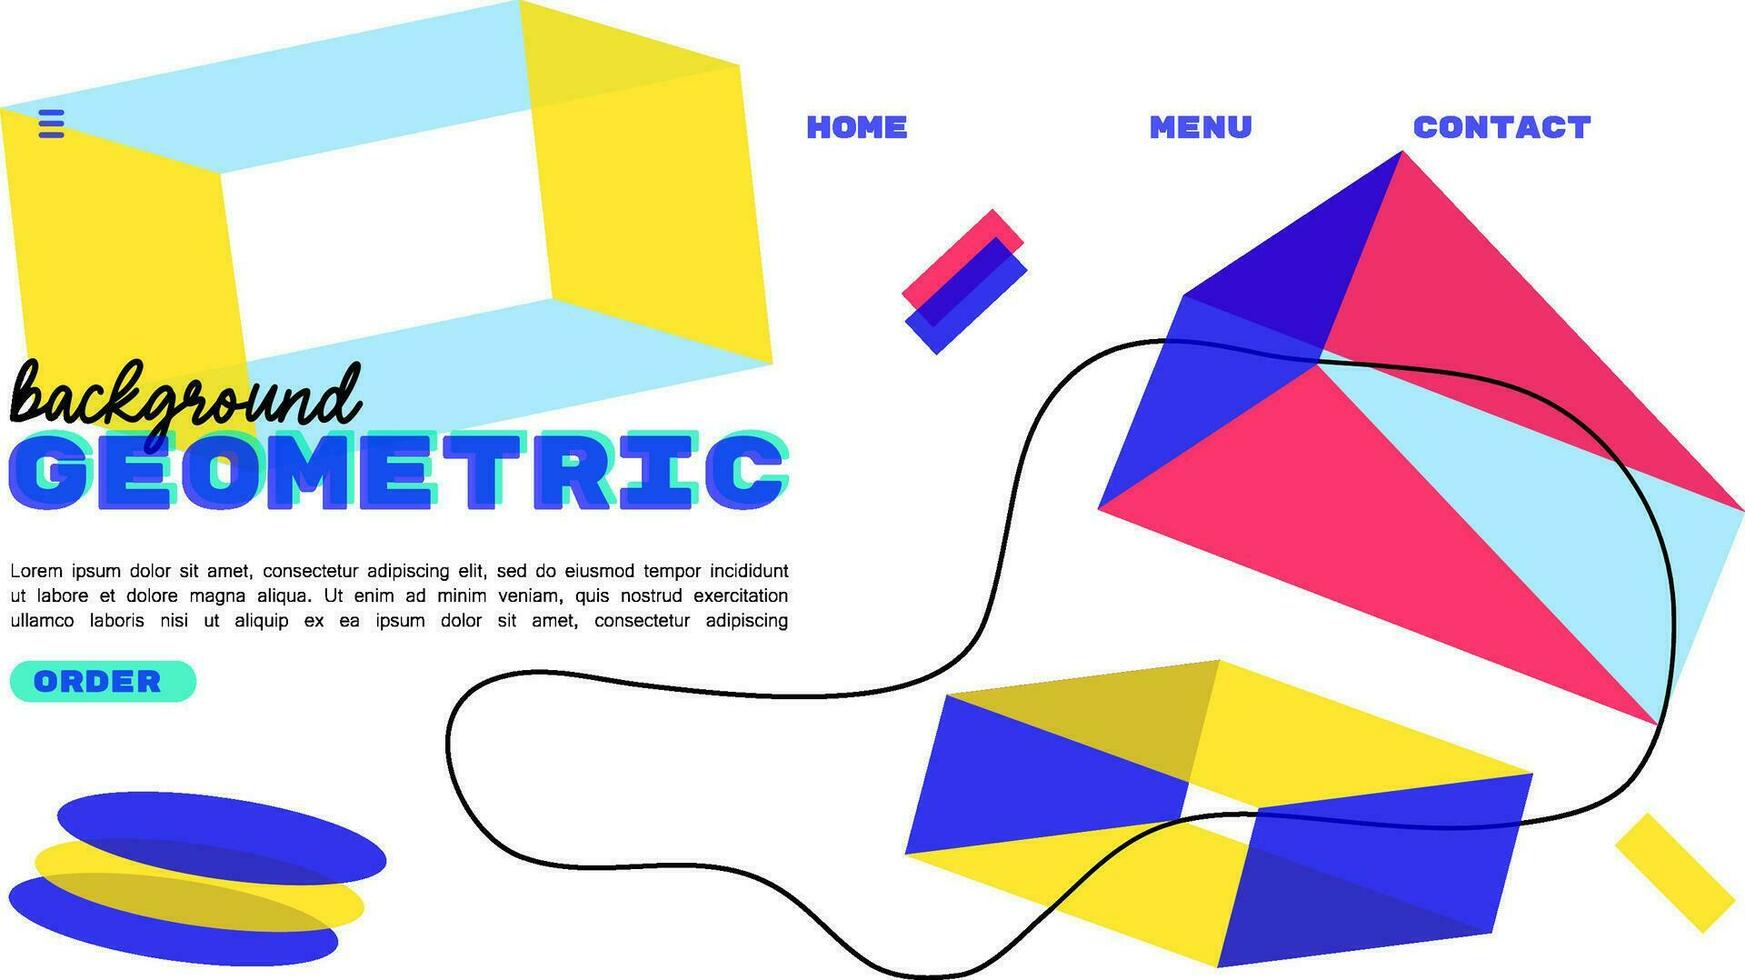 Background 3d geometric abstract riso effect web template design. vector illustration. mobile application